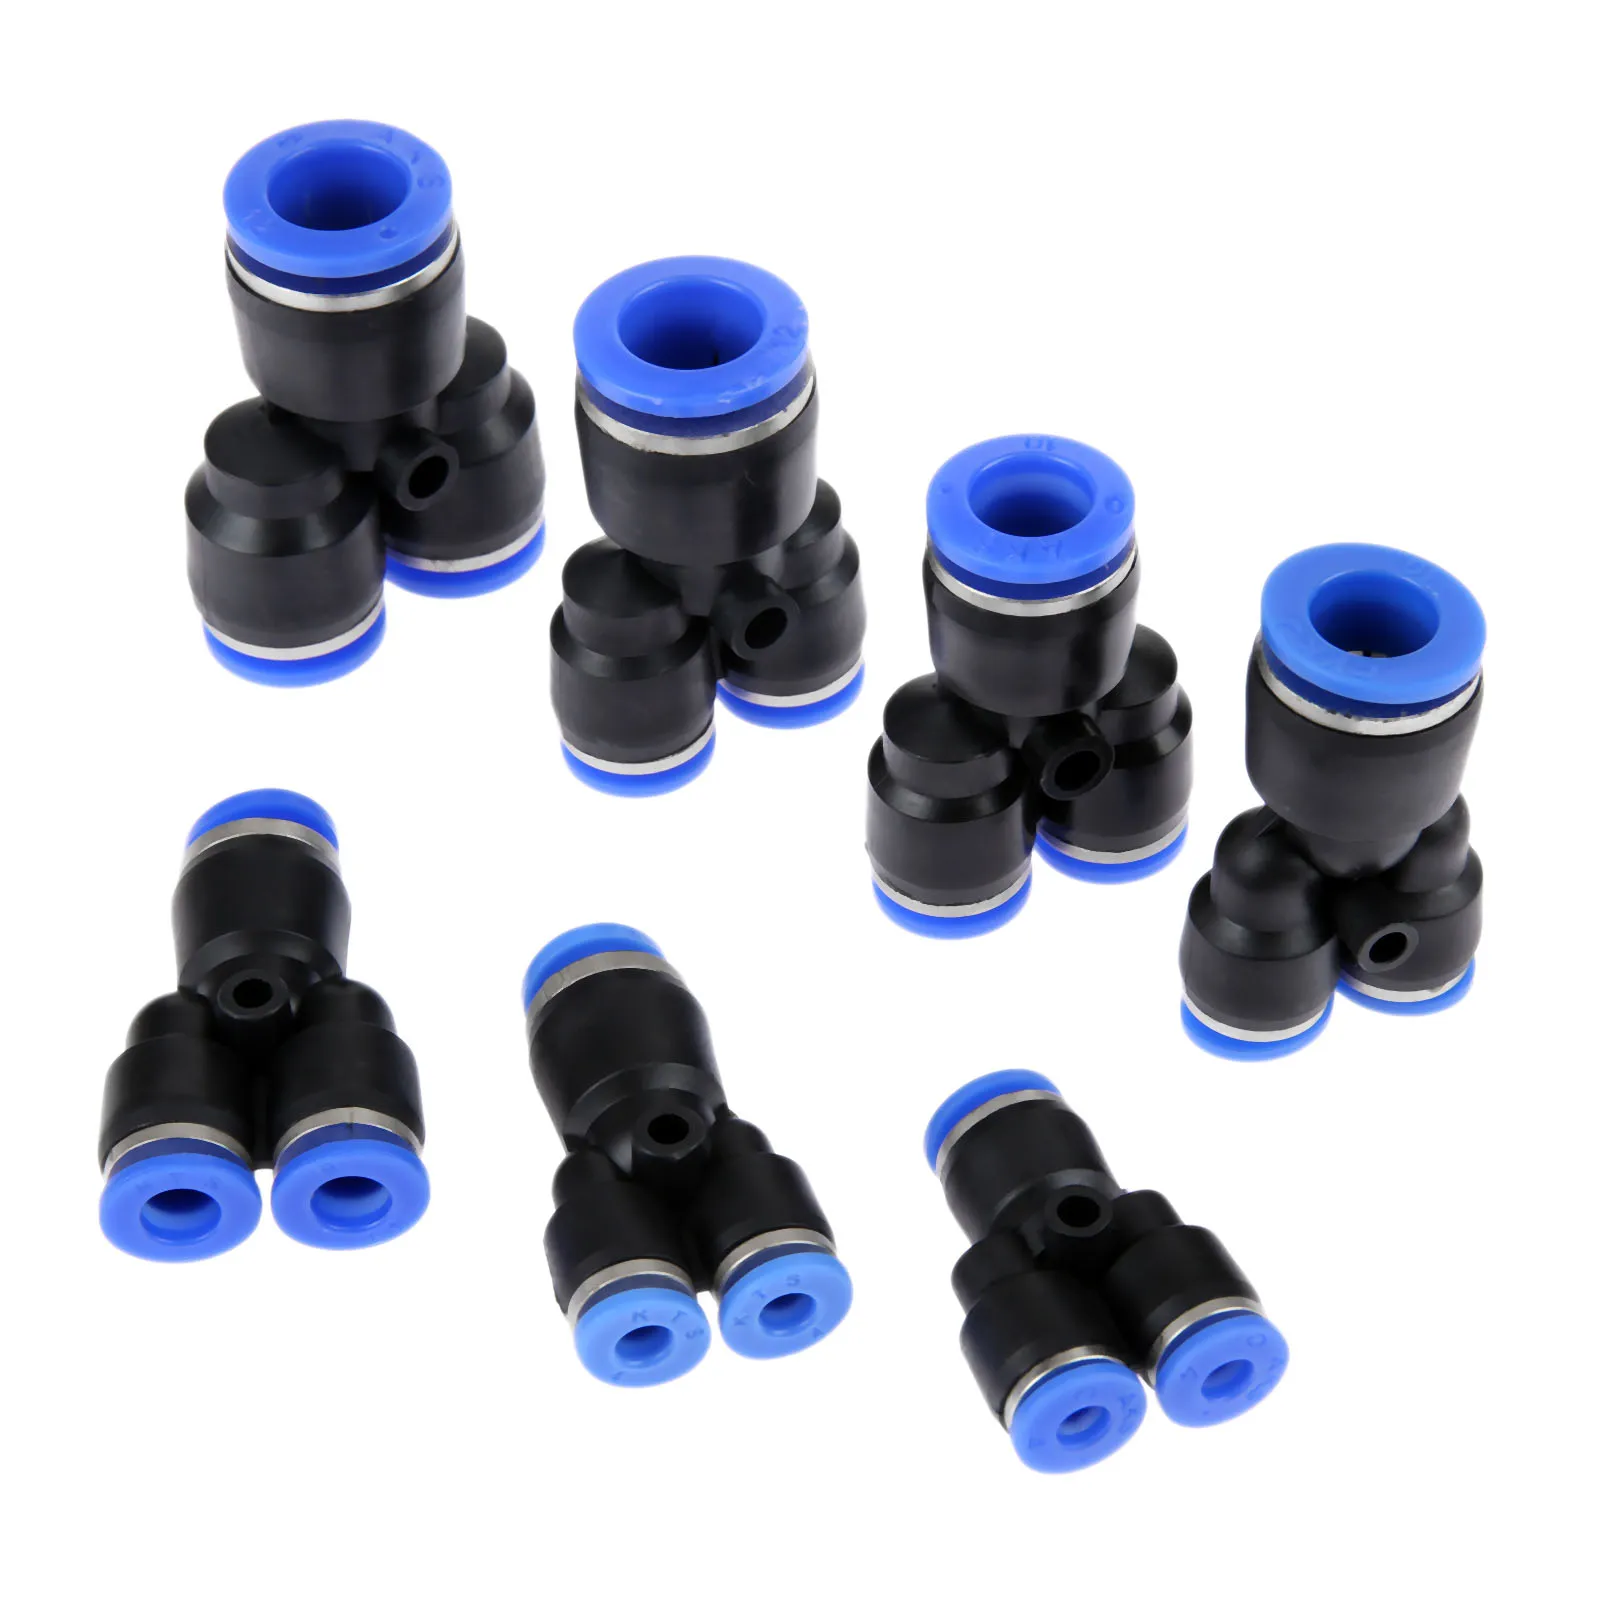 Pneumatic Reduced Y Union Tube OD 1/2" To 3/8" Air Push In 3 Way Fitting 5pcs 